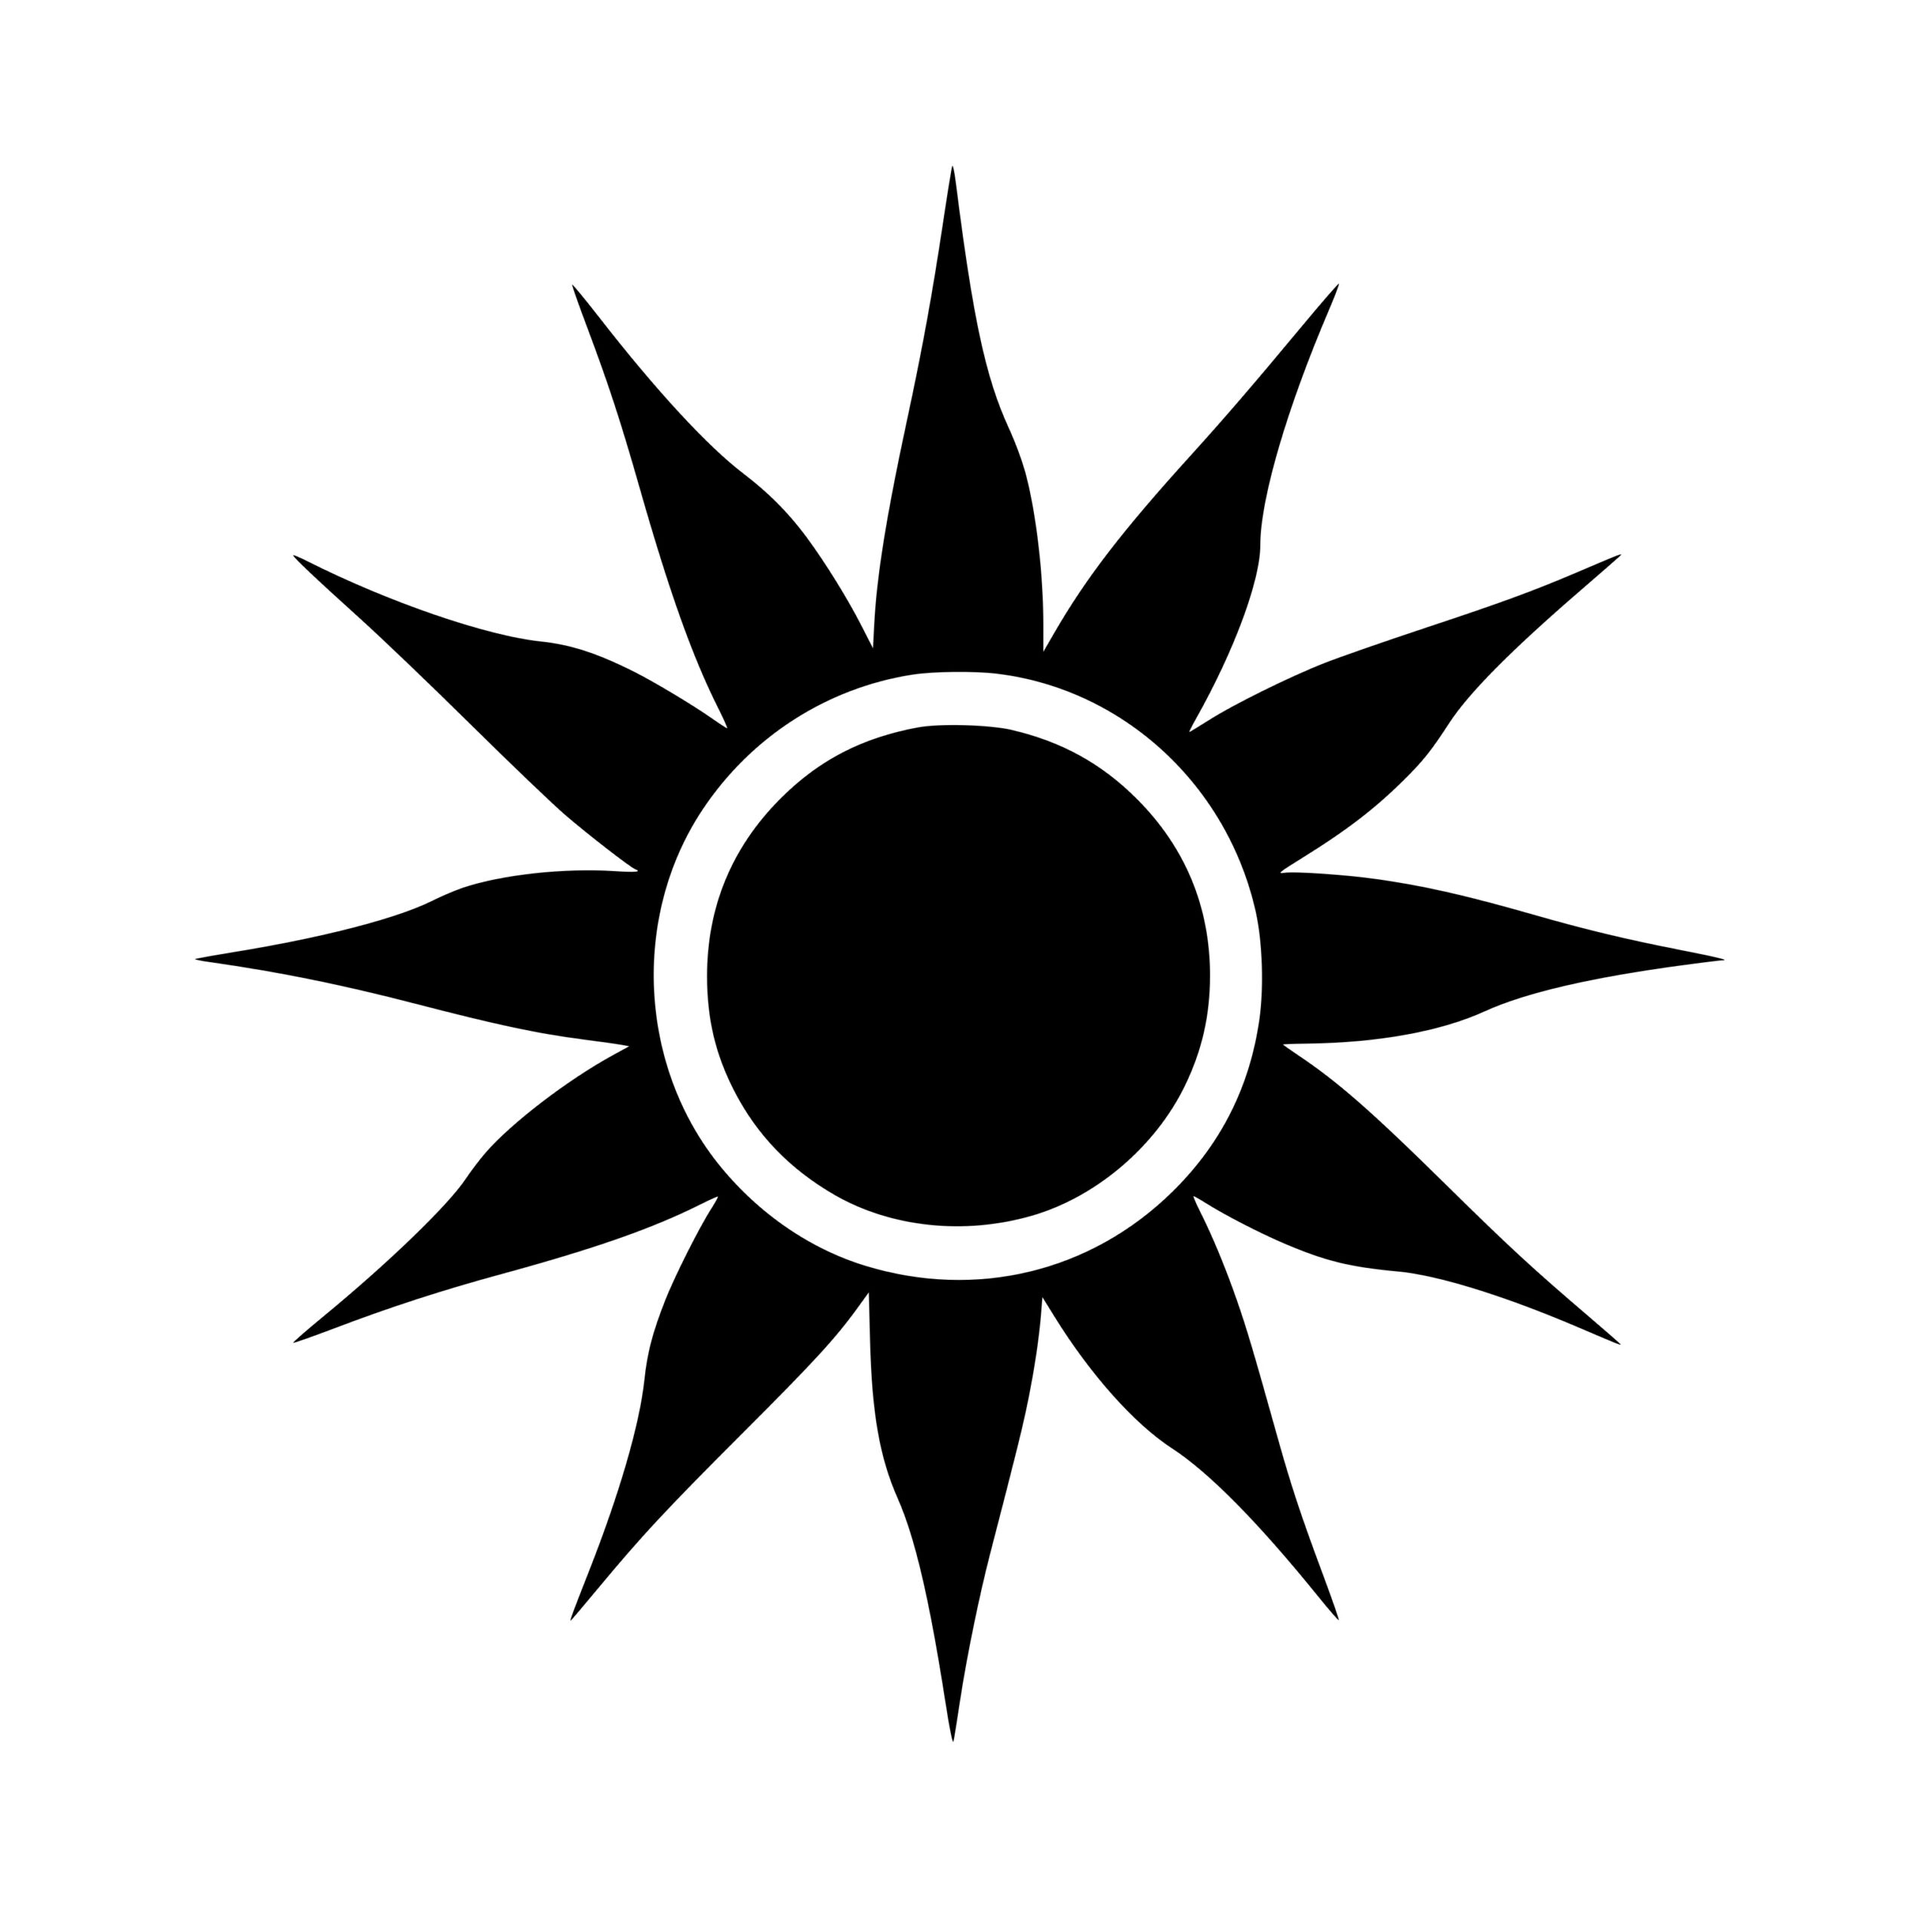 Classic Sun SVG Image: Perfect for Cricut, Silhouette, and Laser Machines